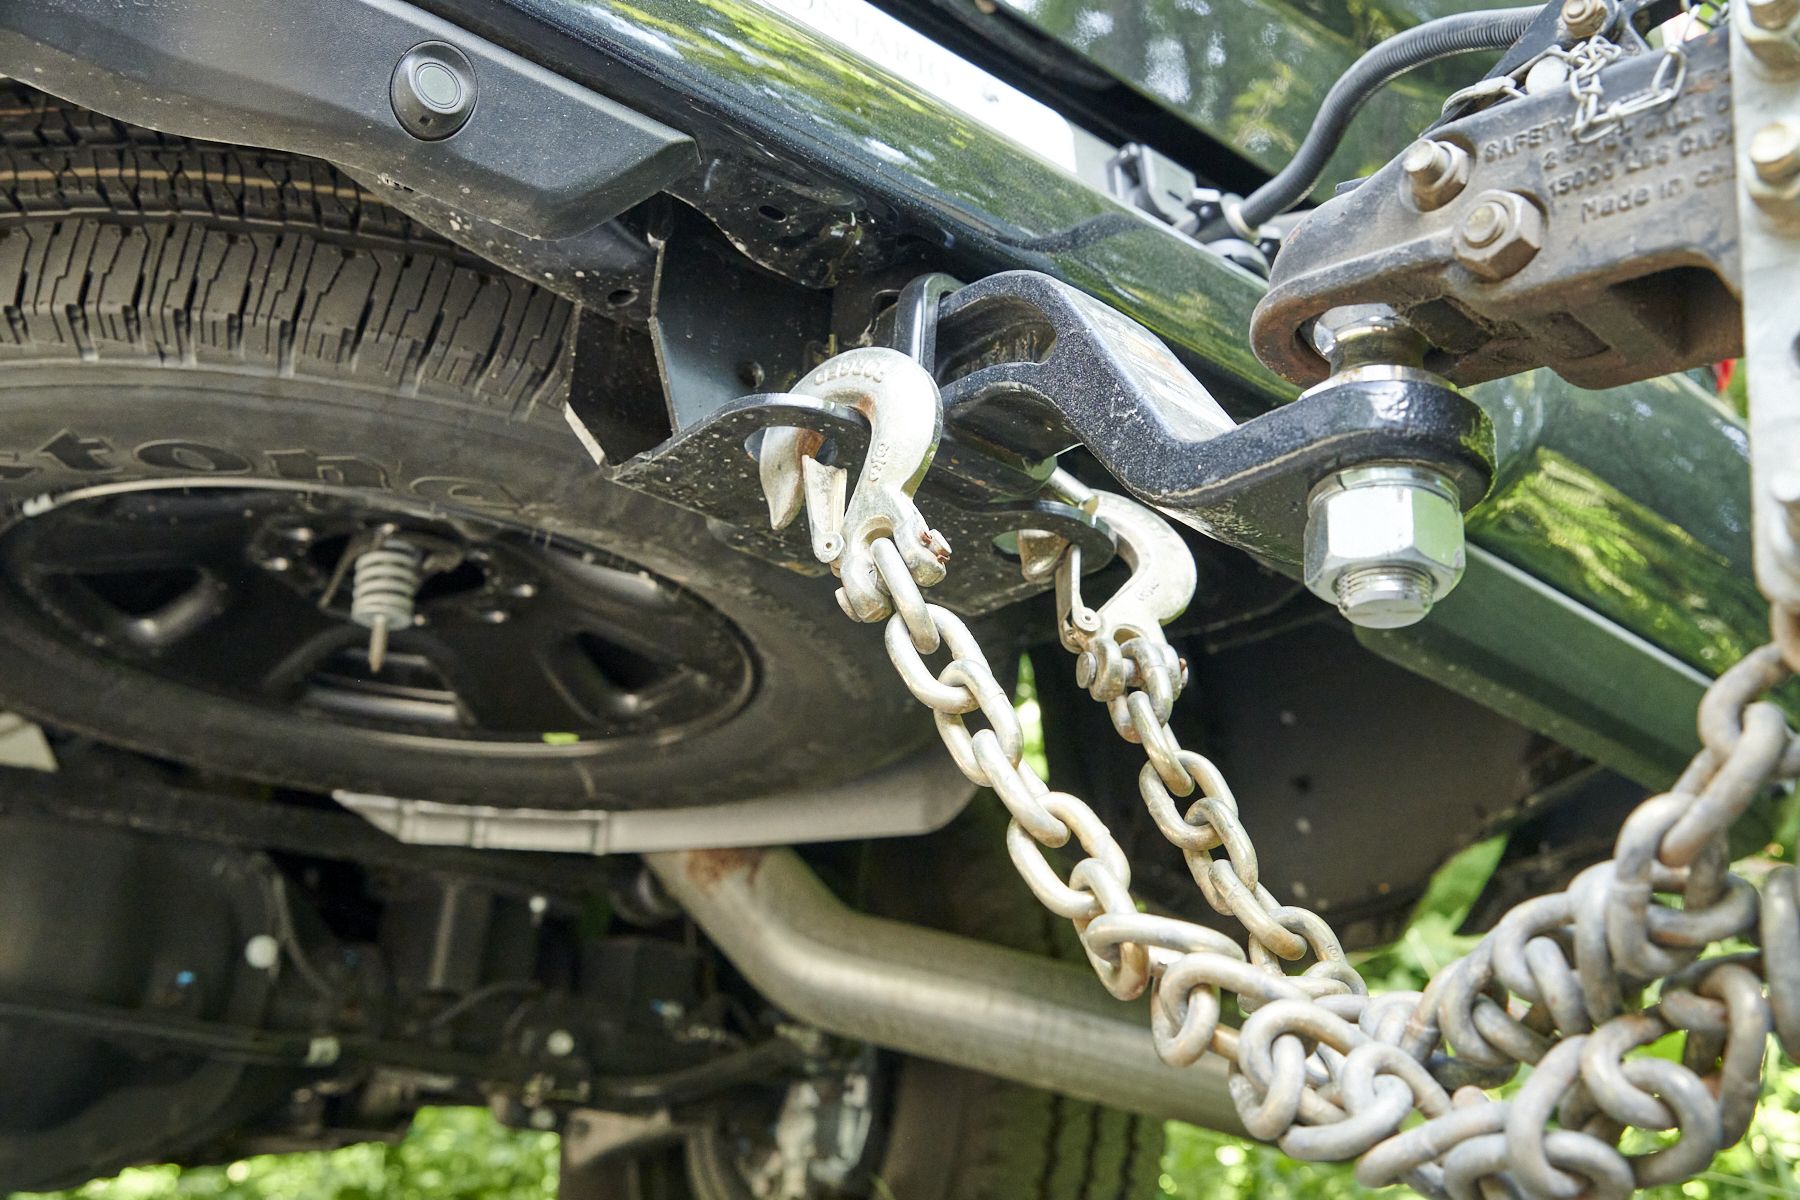 Corner Wrench: Is your vehicle ready to tow?